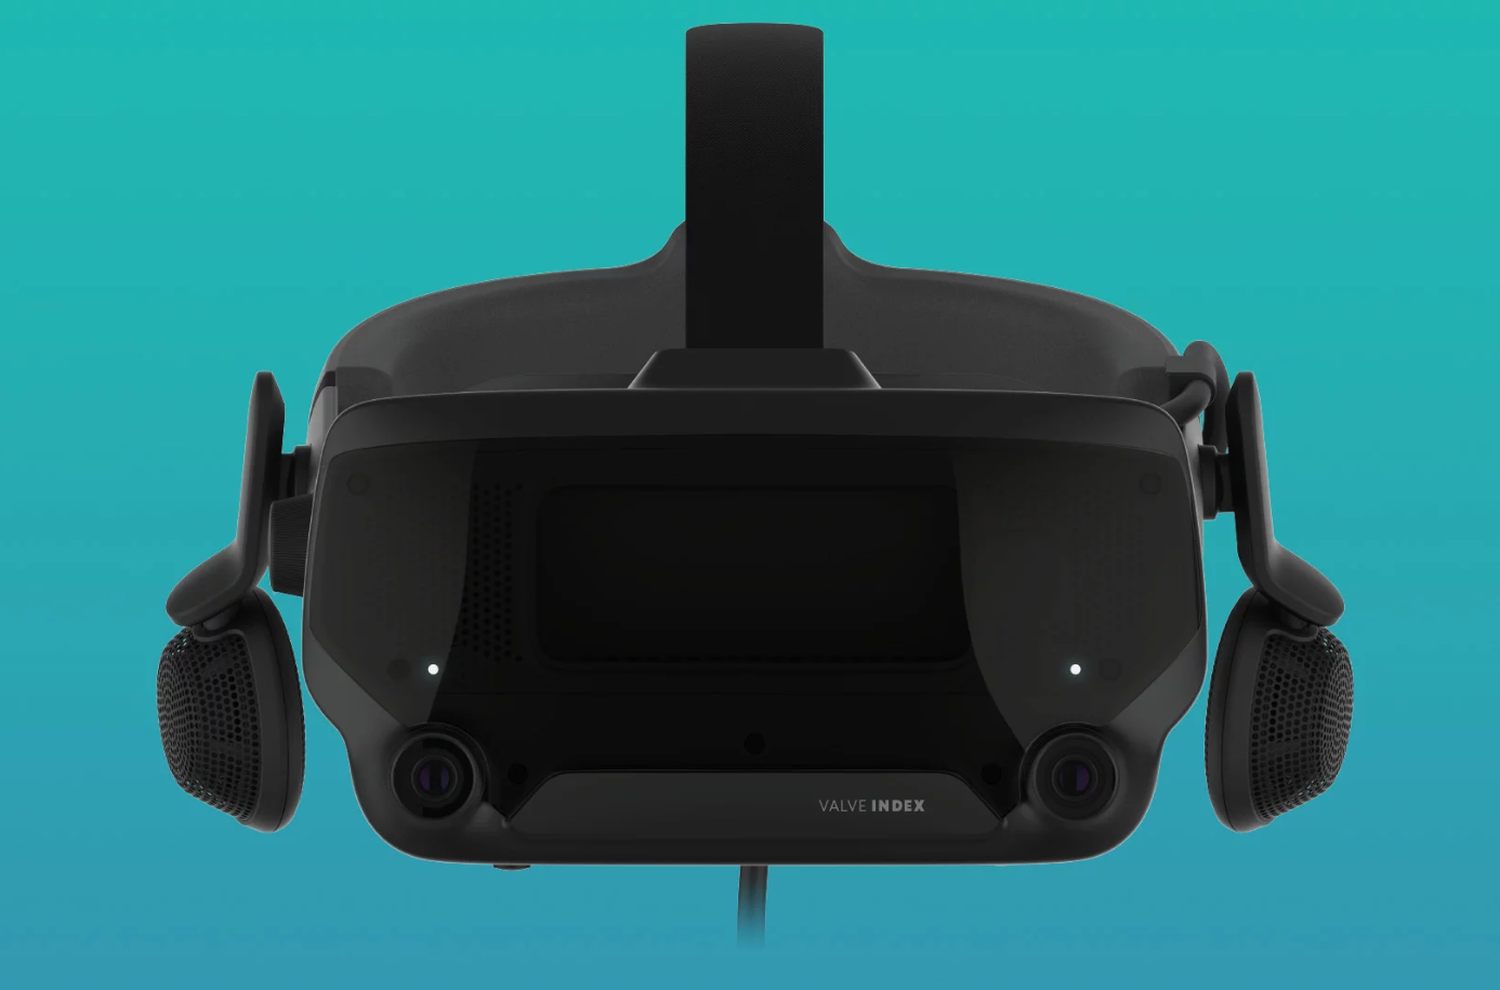 retort Converge Burma Valve May Be Giving Up on VR to Focus on the Steam Deck | Digital Trends